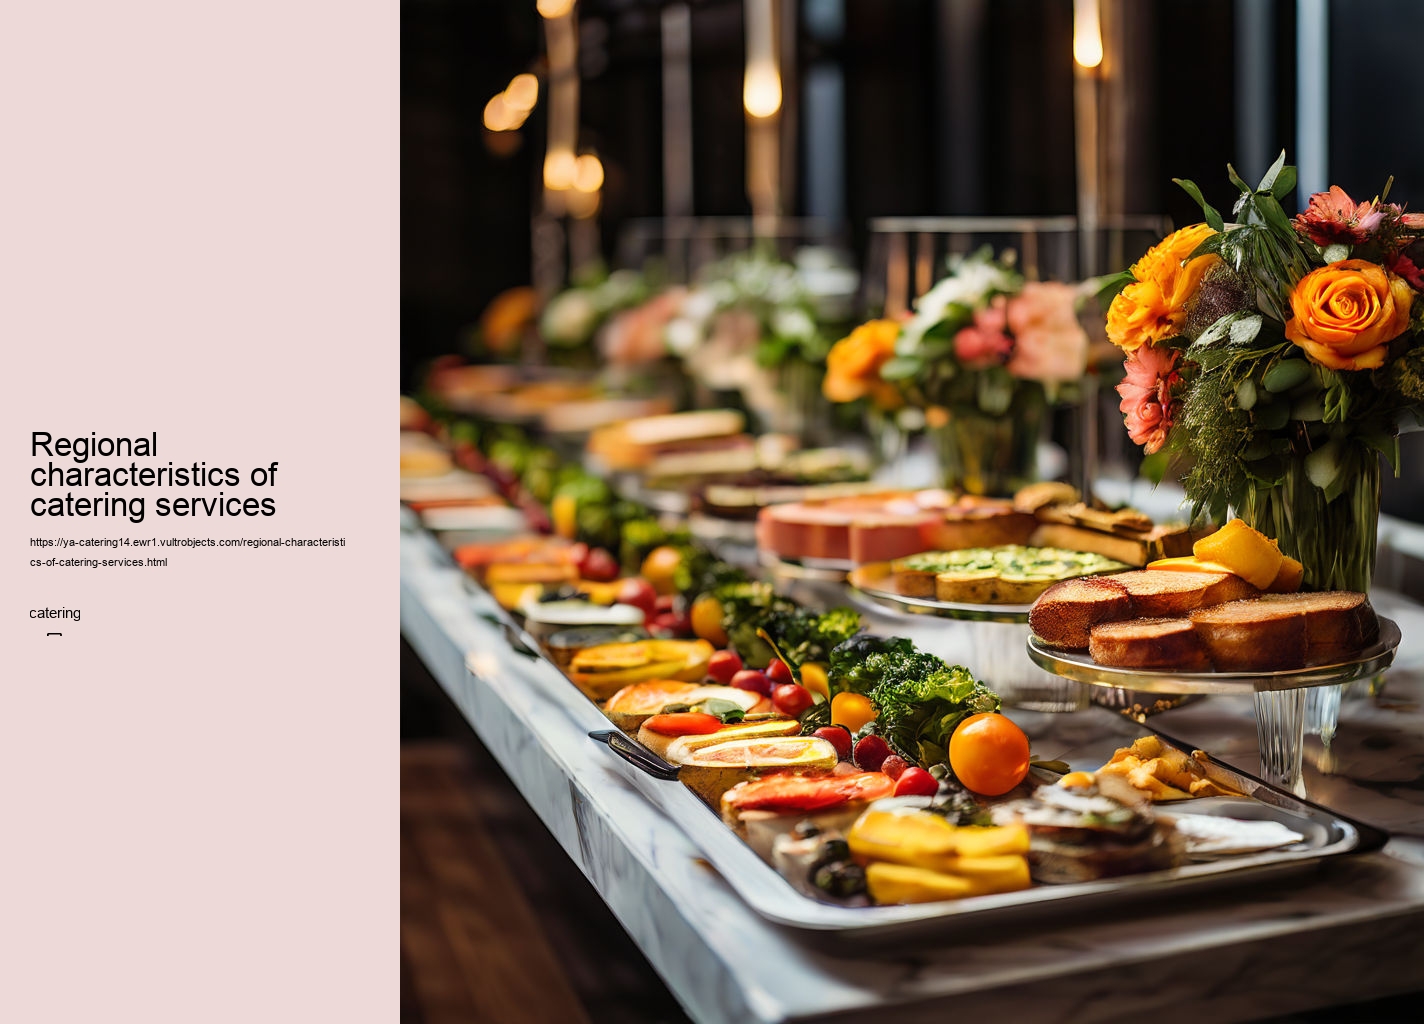 Regional characteristics of catering services